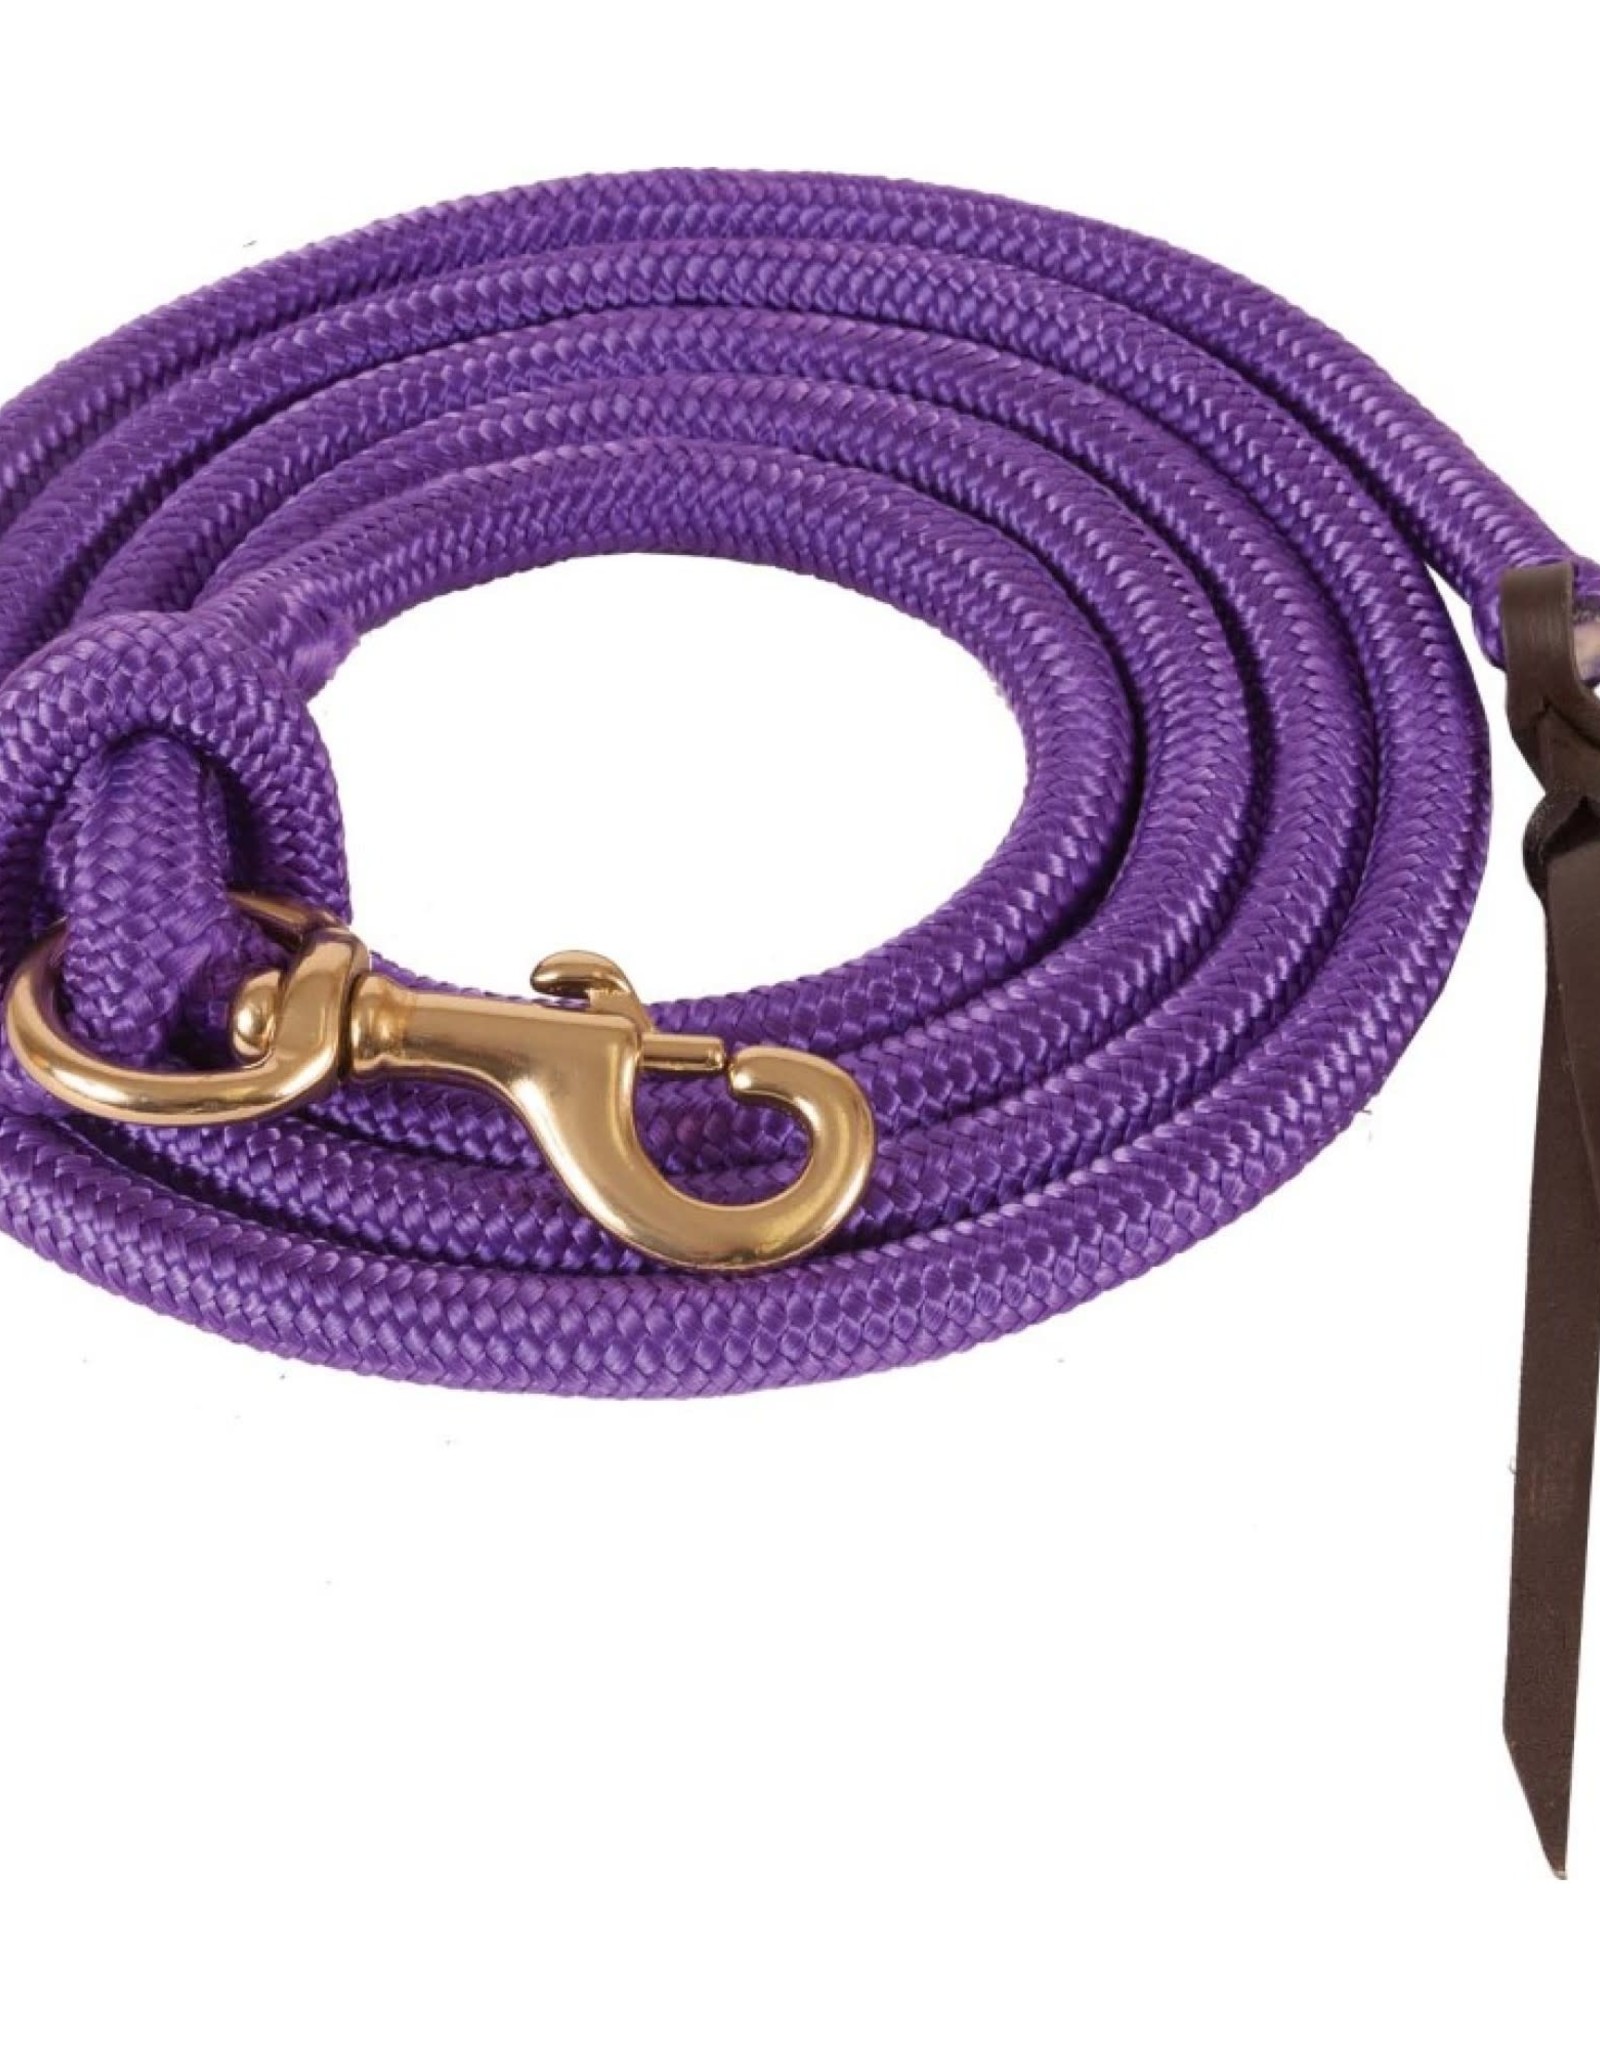 MUSTANG  COWBOY LEAD ROPE, 5/8 INCH BY 9 FEET